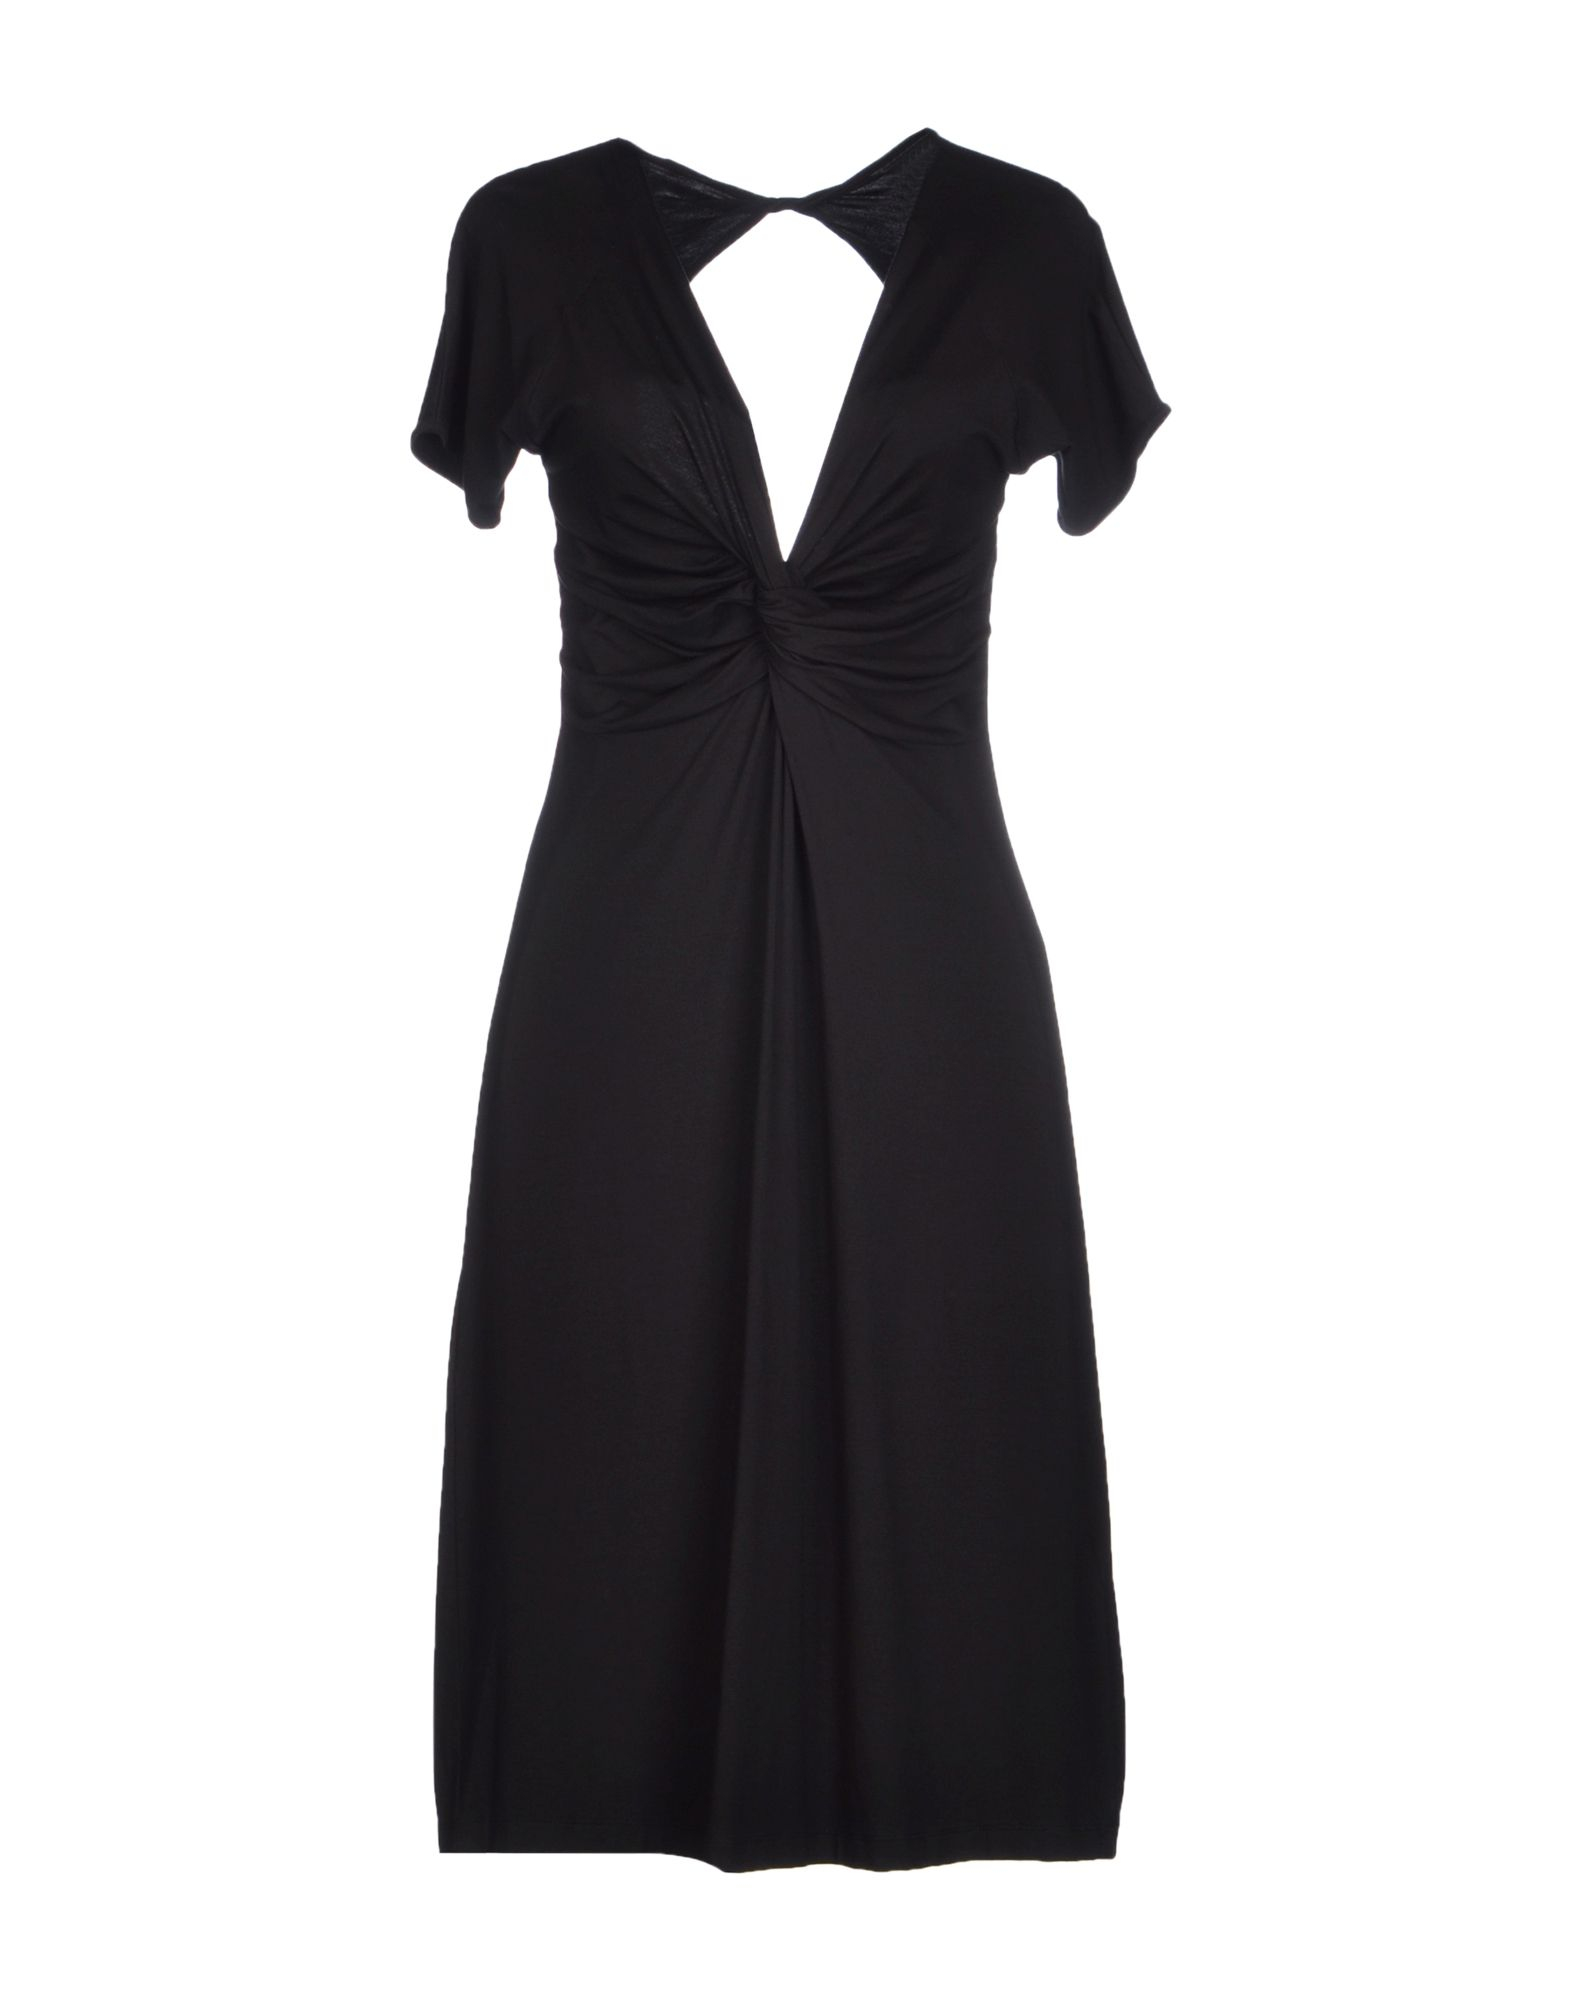 Guess By Marciano Knee-Length Dress in Black | Lyst